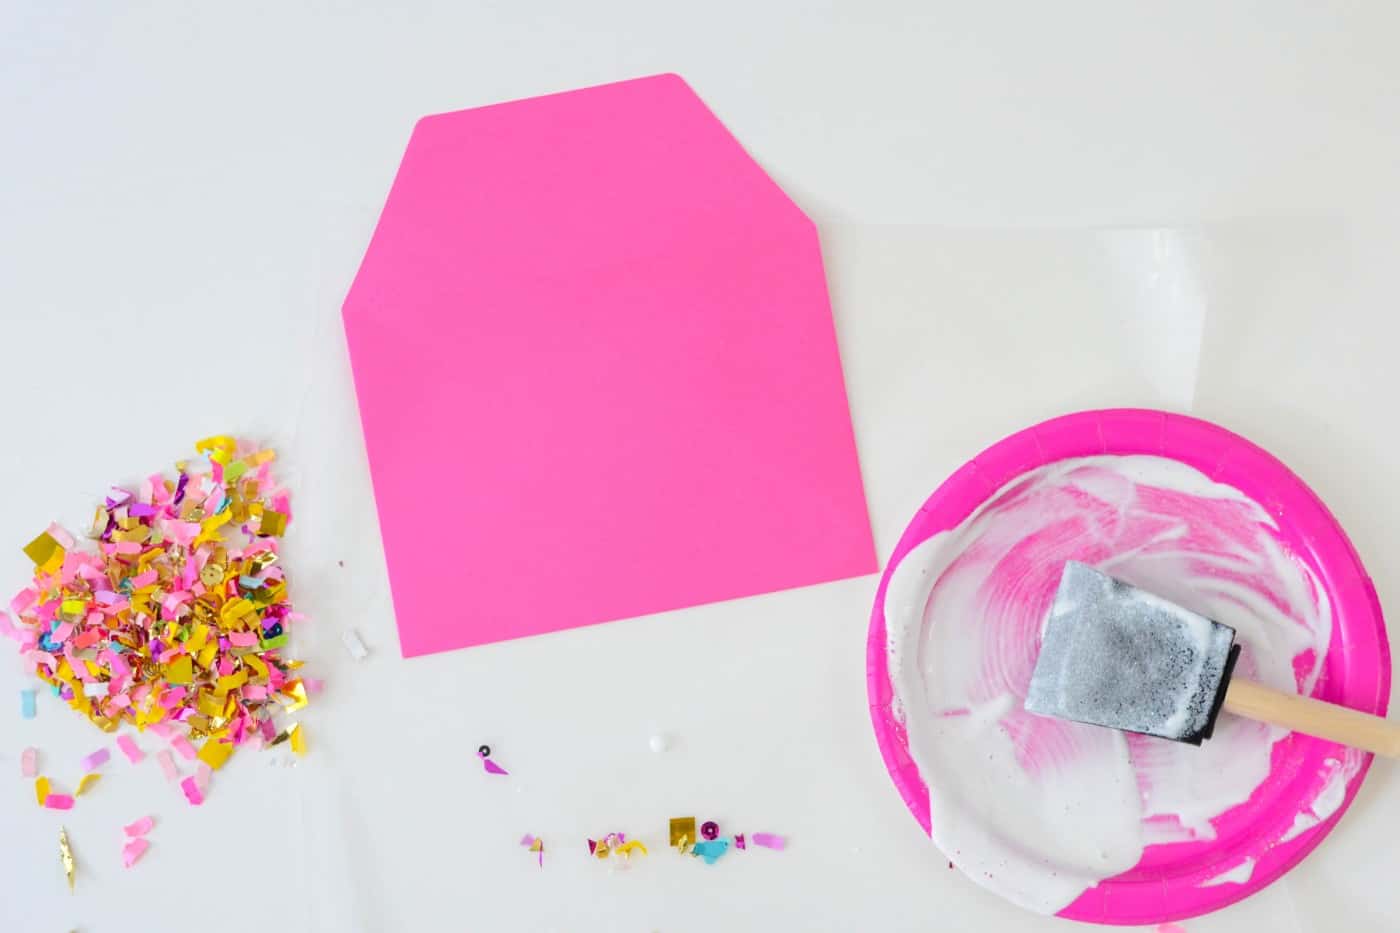 Pile of confetti, pink envelope, and a foam brush with Mod Podge on a plate